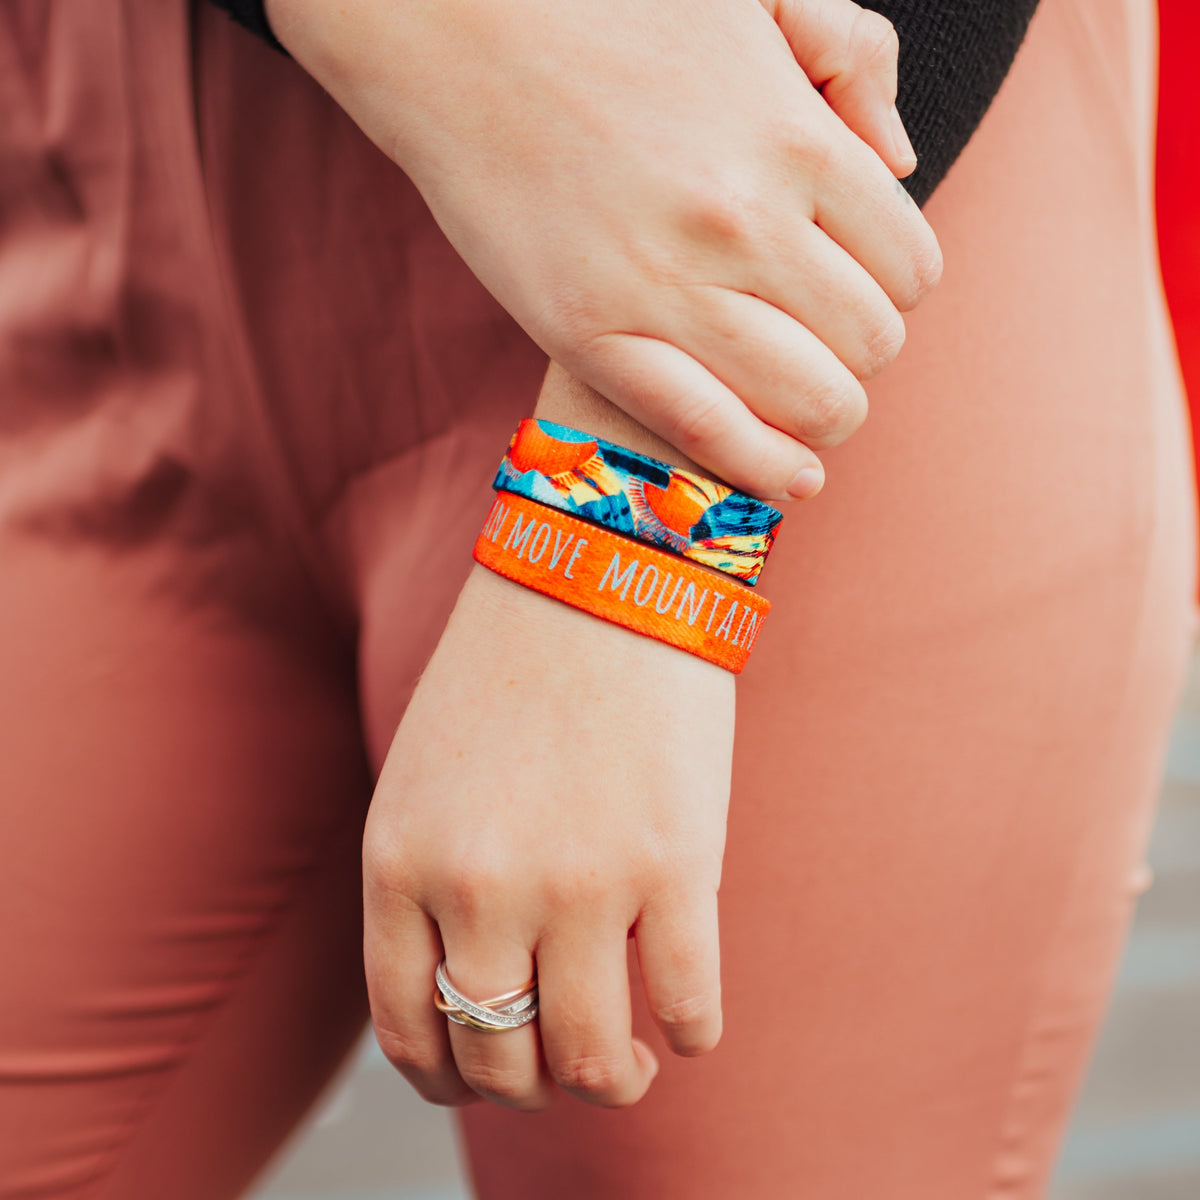 You Can Move Mountains-Sold Out - Singles-ZOX - This item is sold out and will not be restocked.